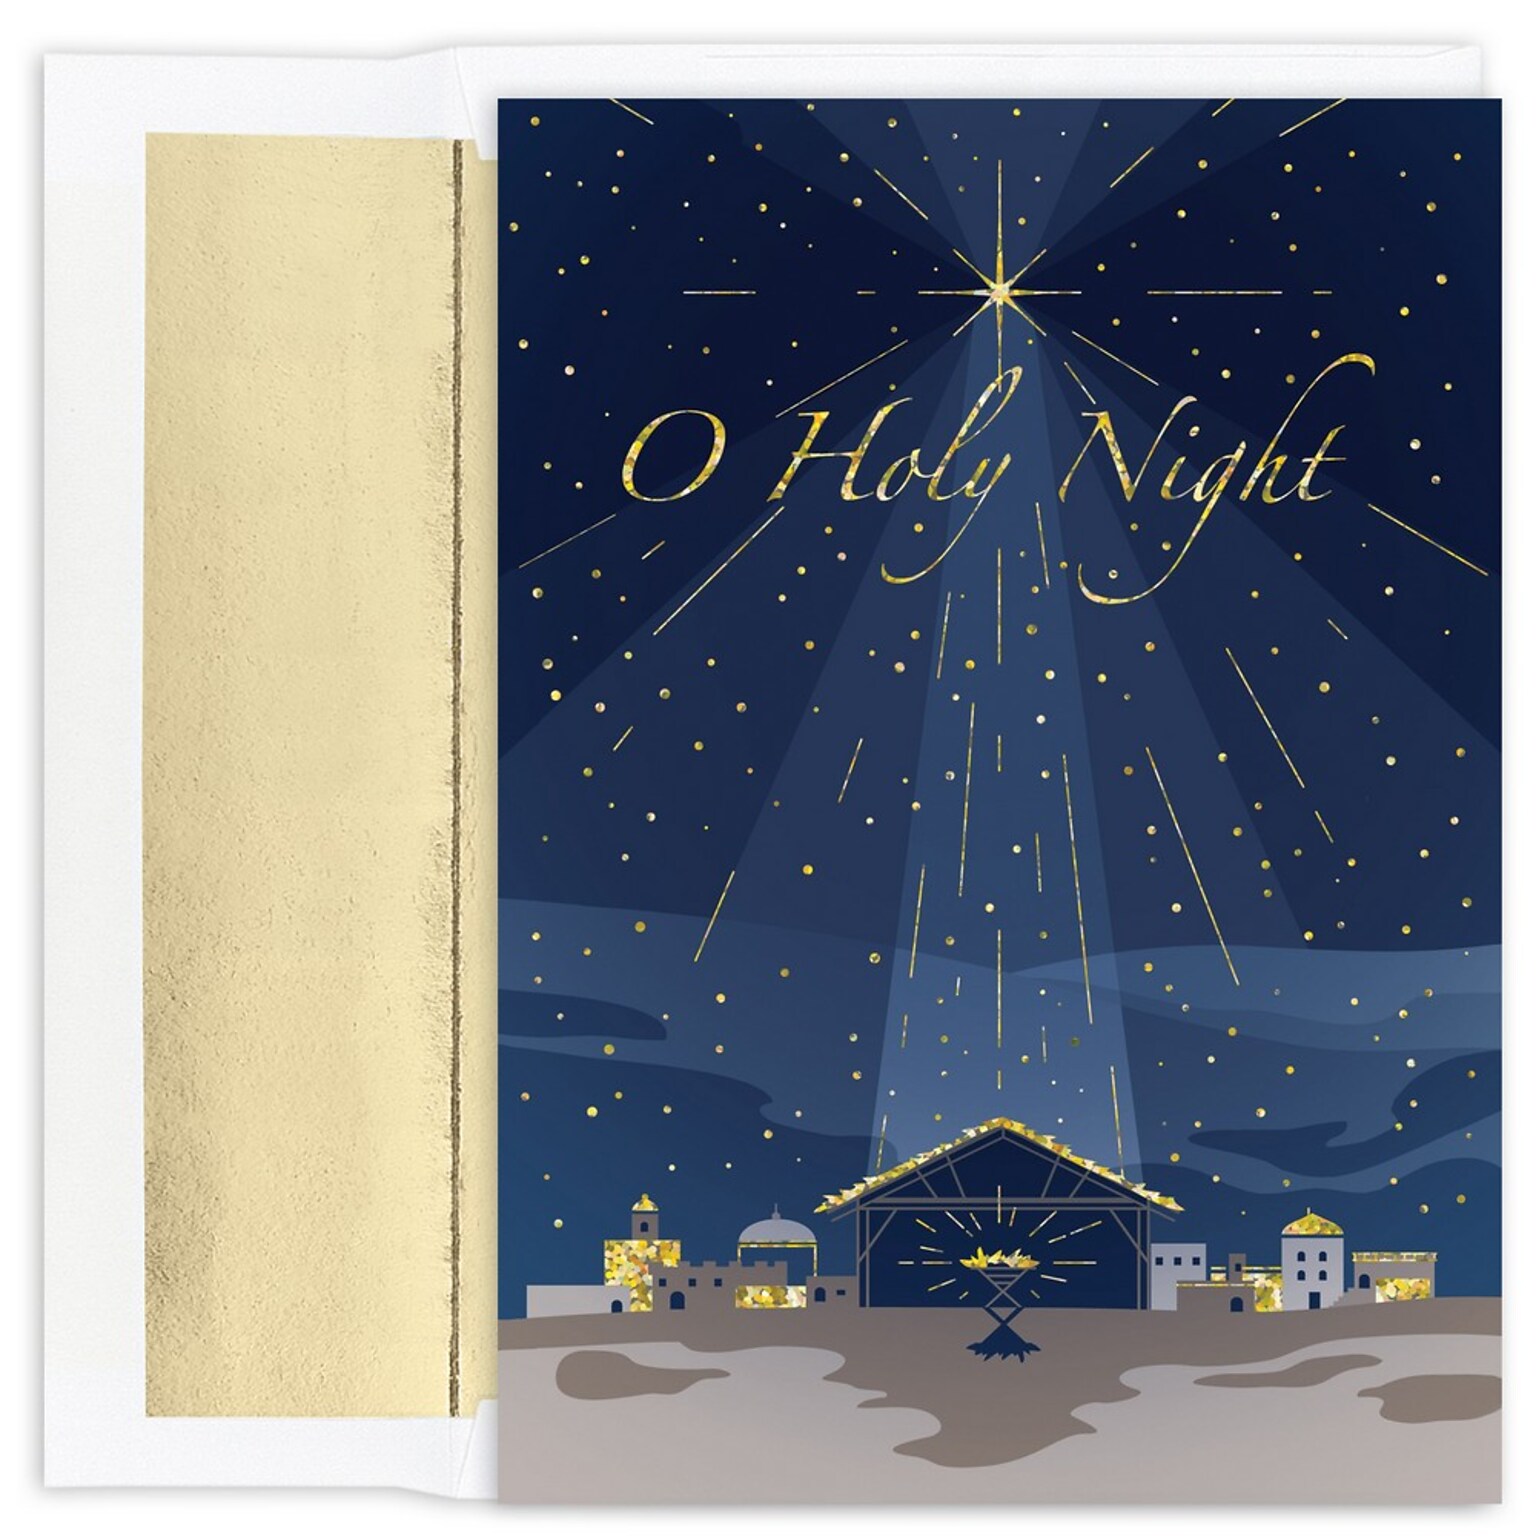 JAM Paper® Christmas Cards Boxed Set, O Holy Night, 16/Pack